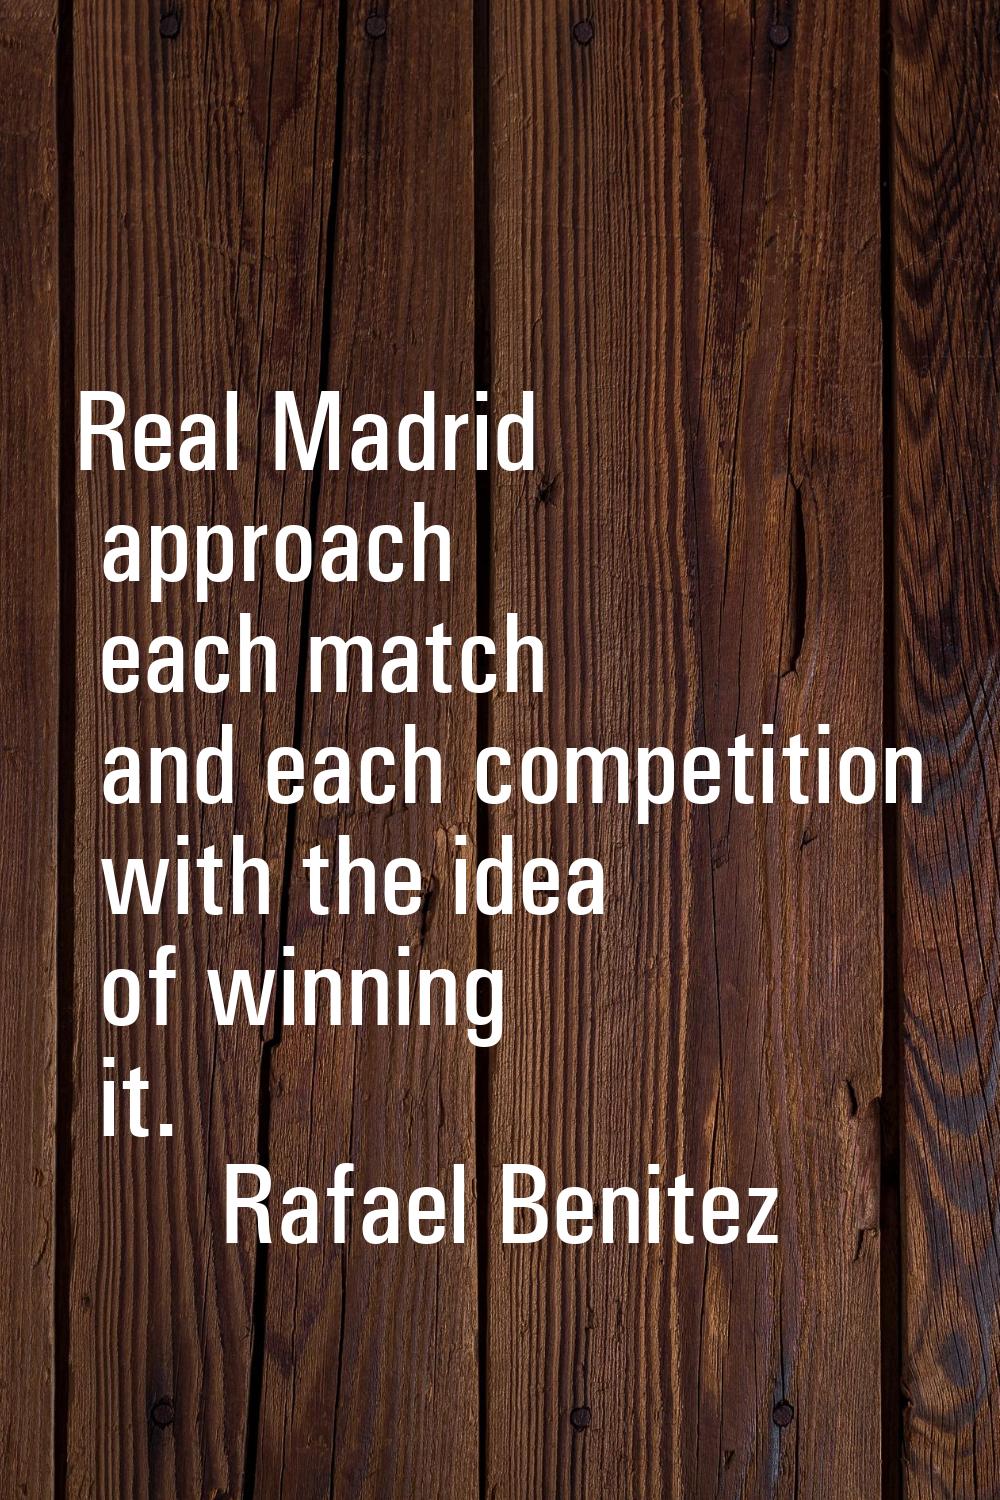 Real Madrid approach each match and each competition with the idea of winning it.